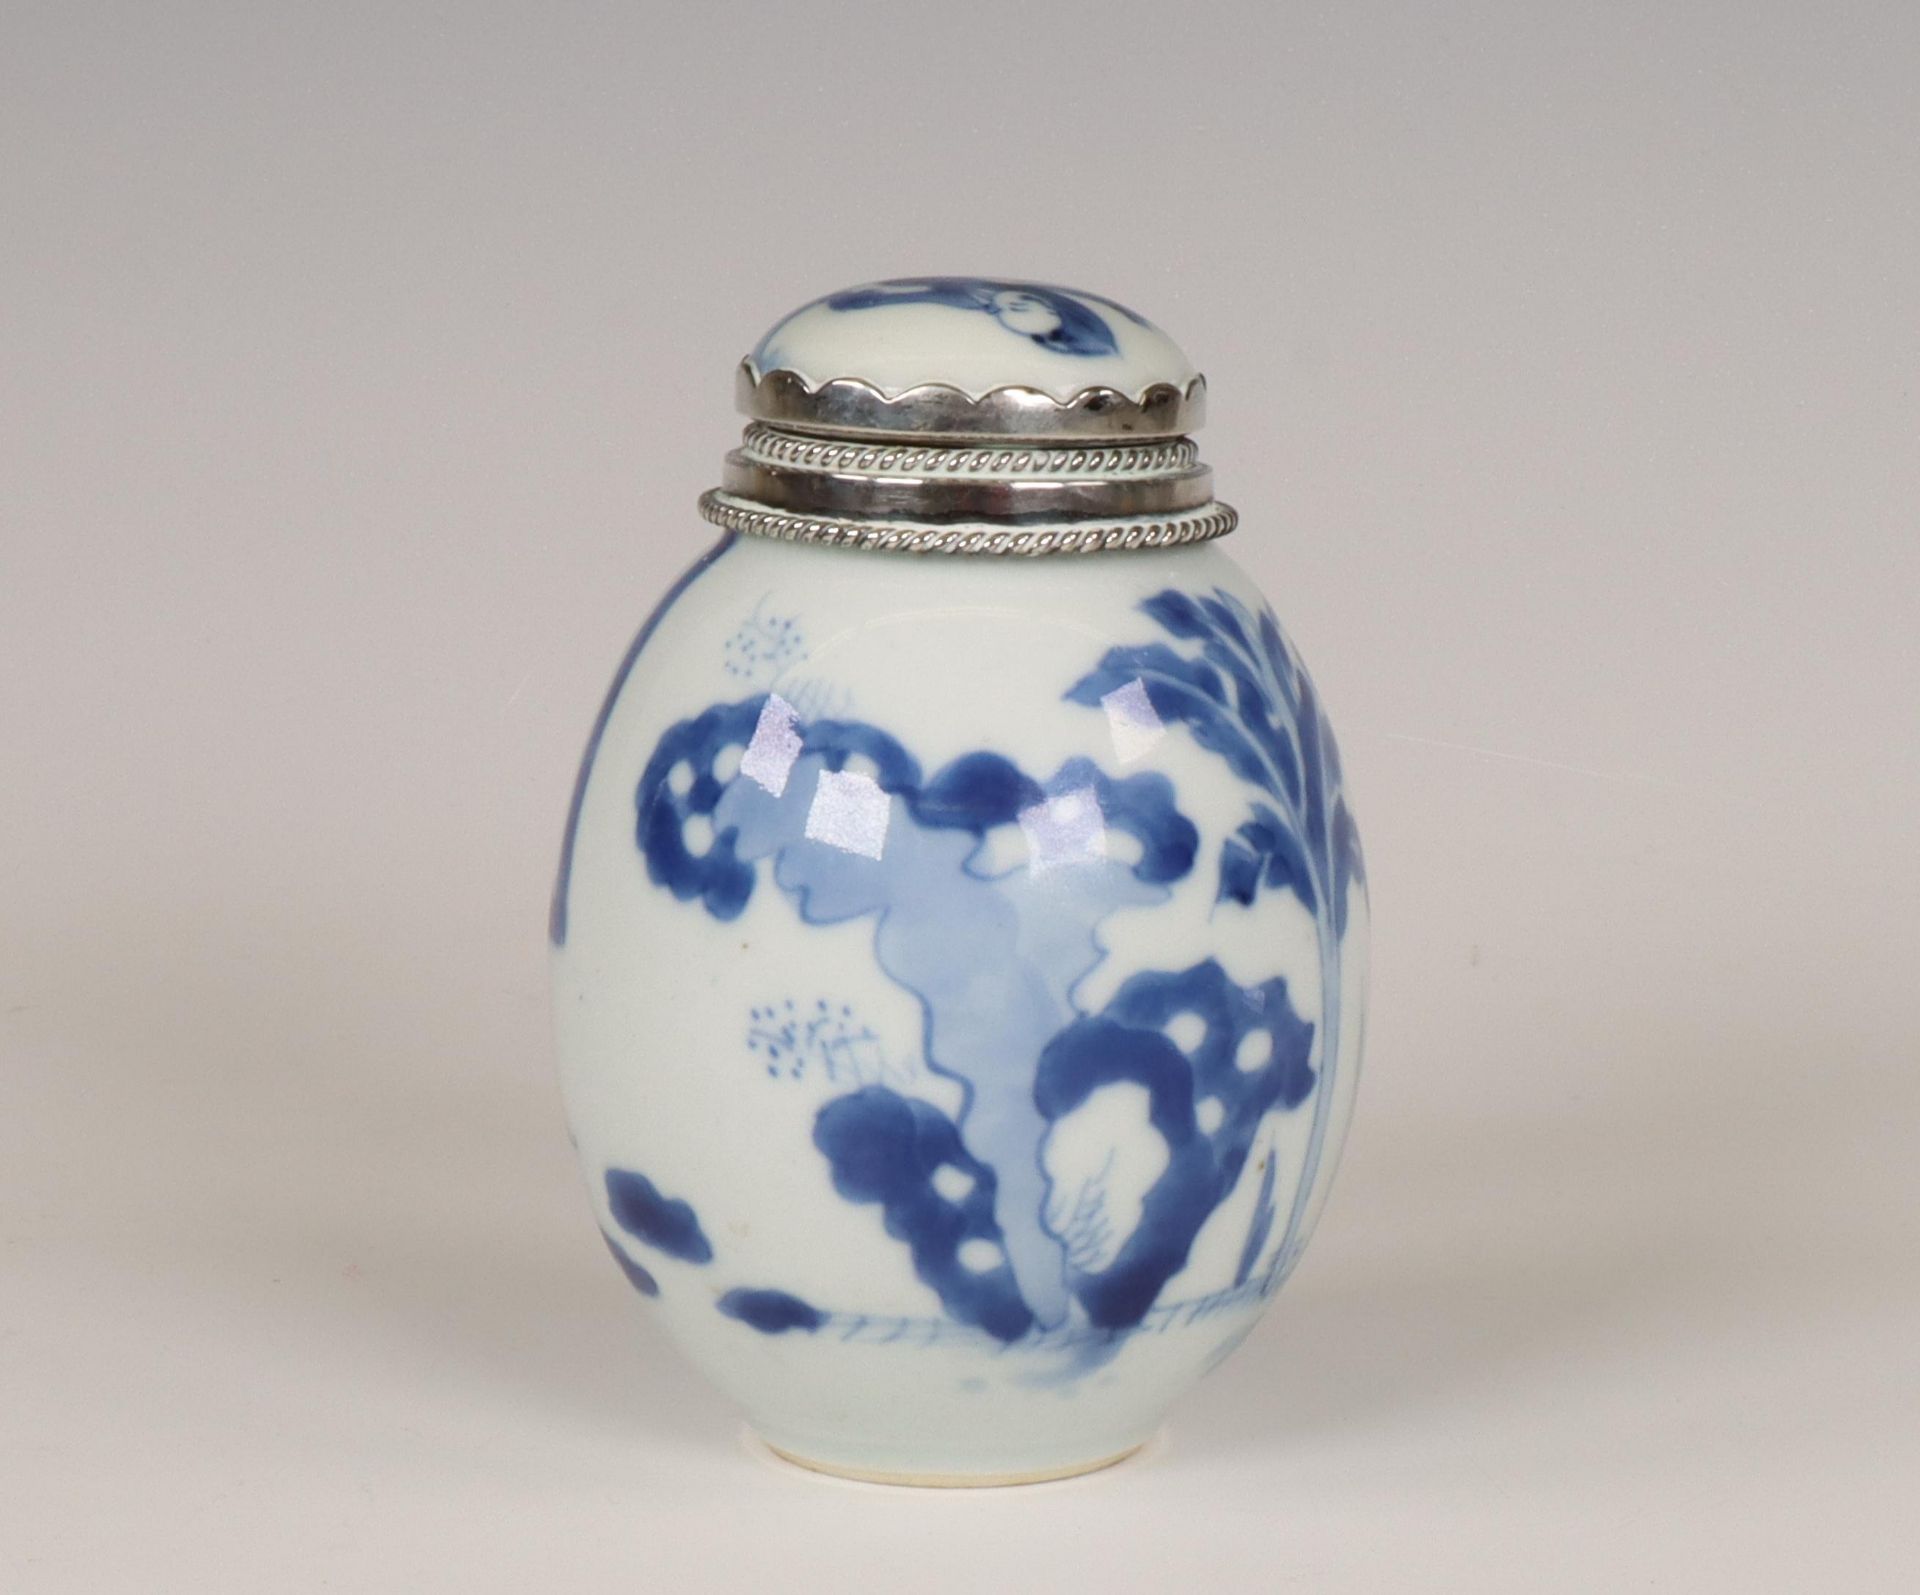 China, a silver-mounted blue and white porcelain oviform jar and cover, Kangxi period (1662-1722), t - Image 3 of 8